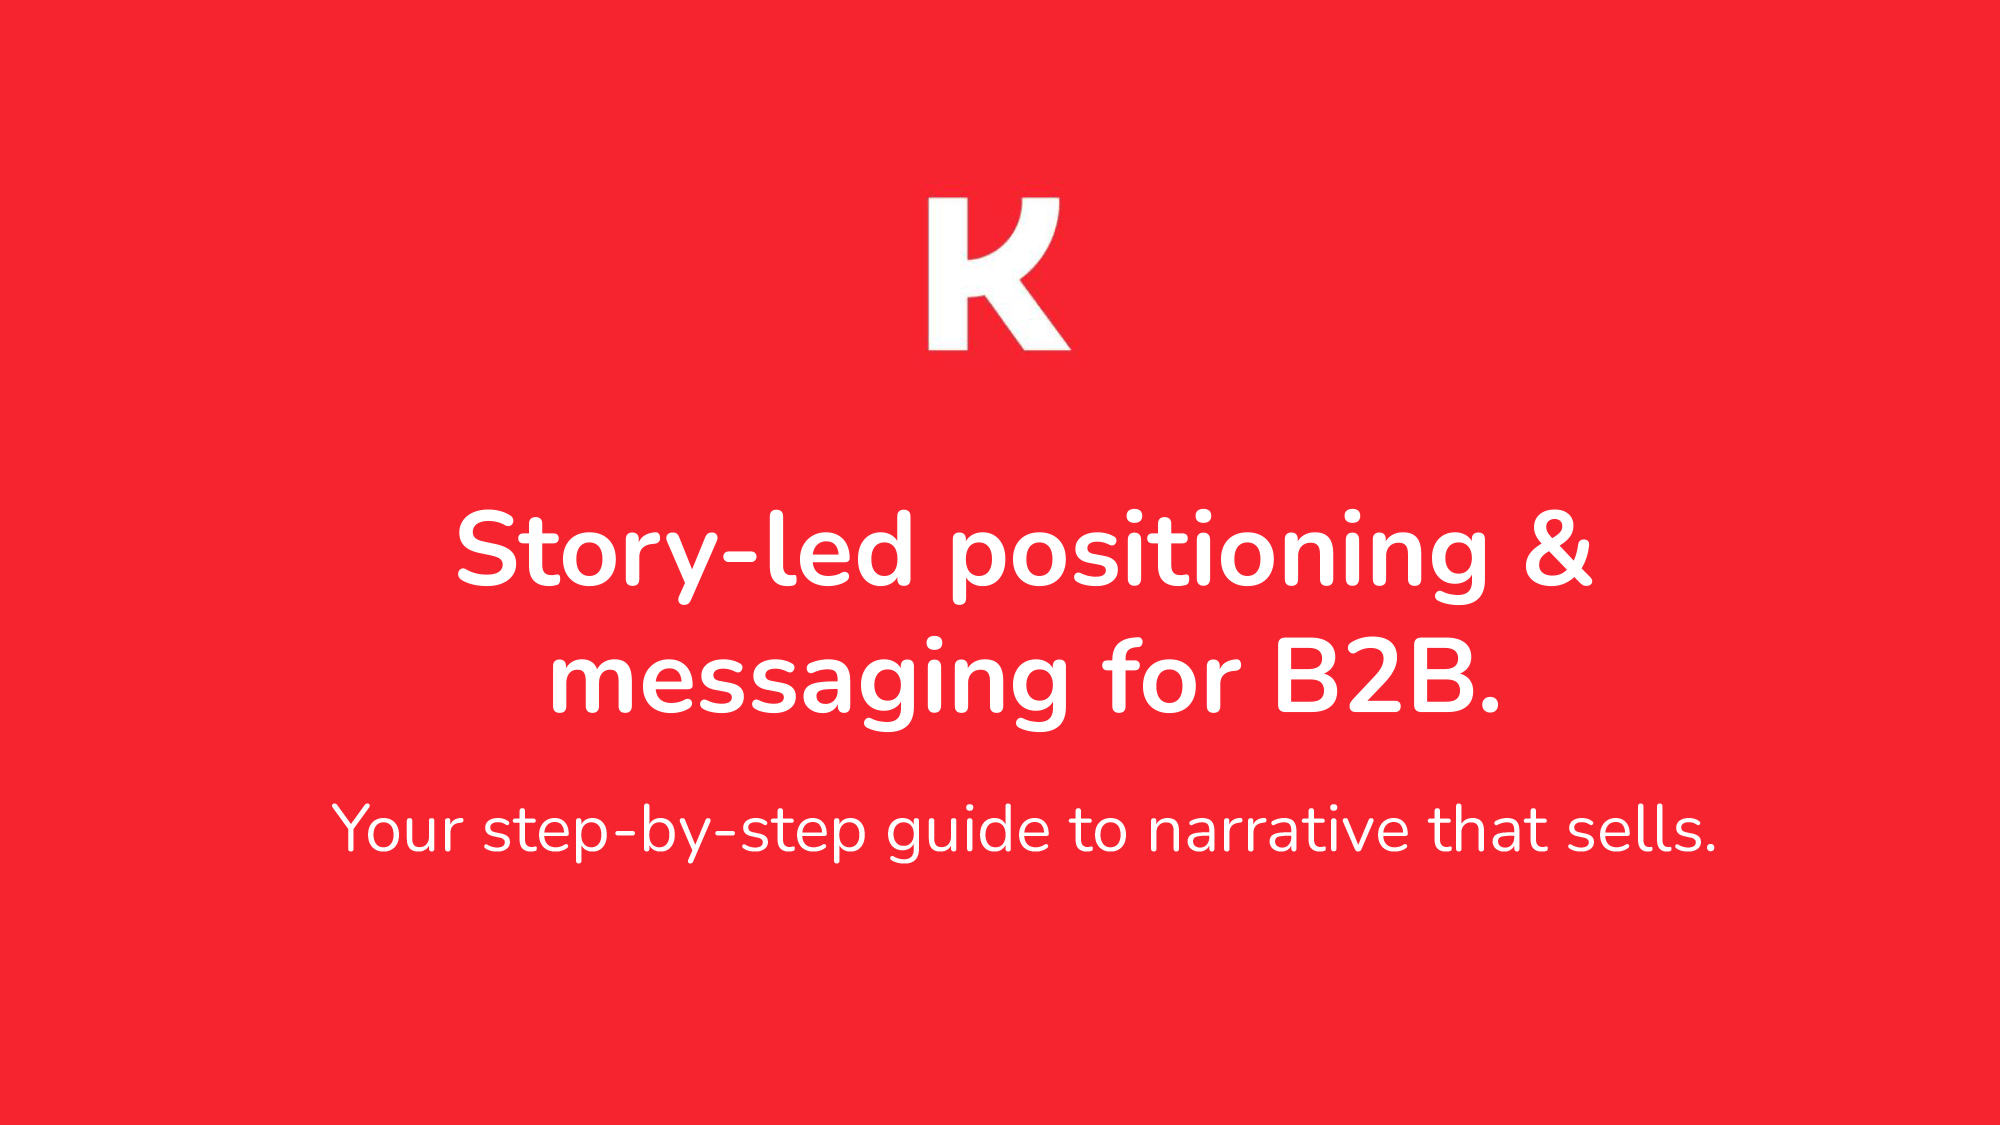 The 7-step story-led positioning framework behind the top B2B SaaS companies